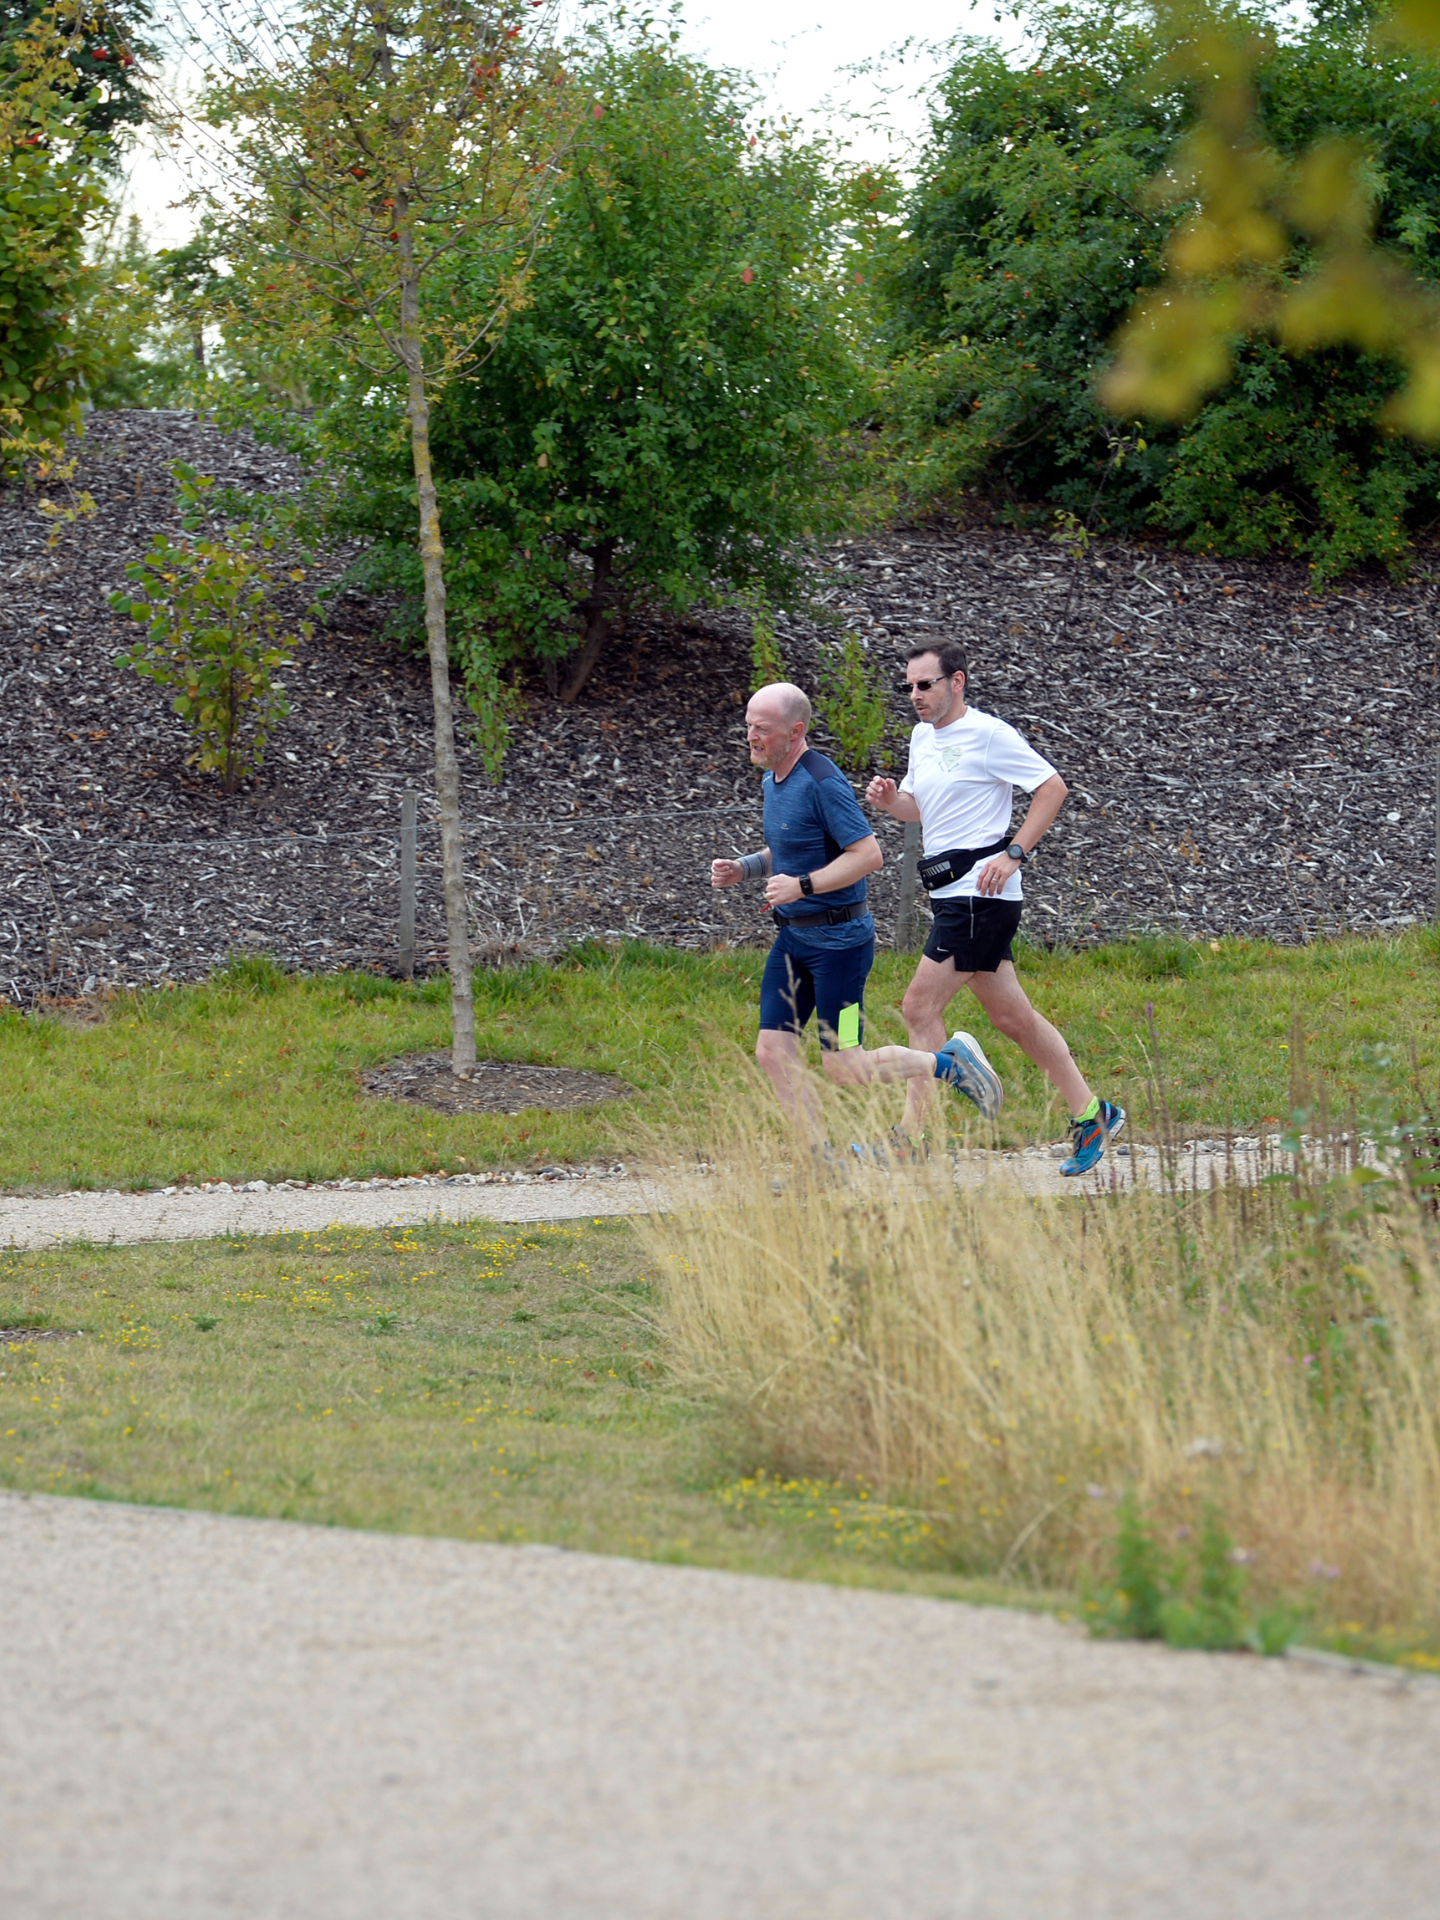 two men running on a path with shrubbery